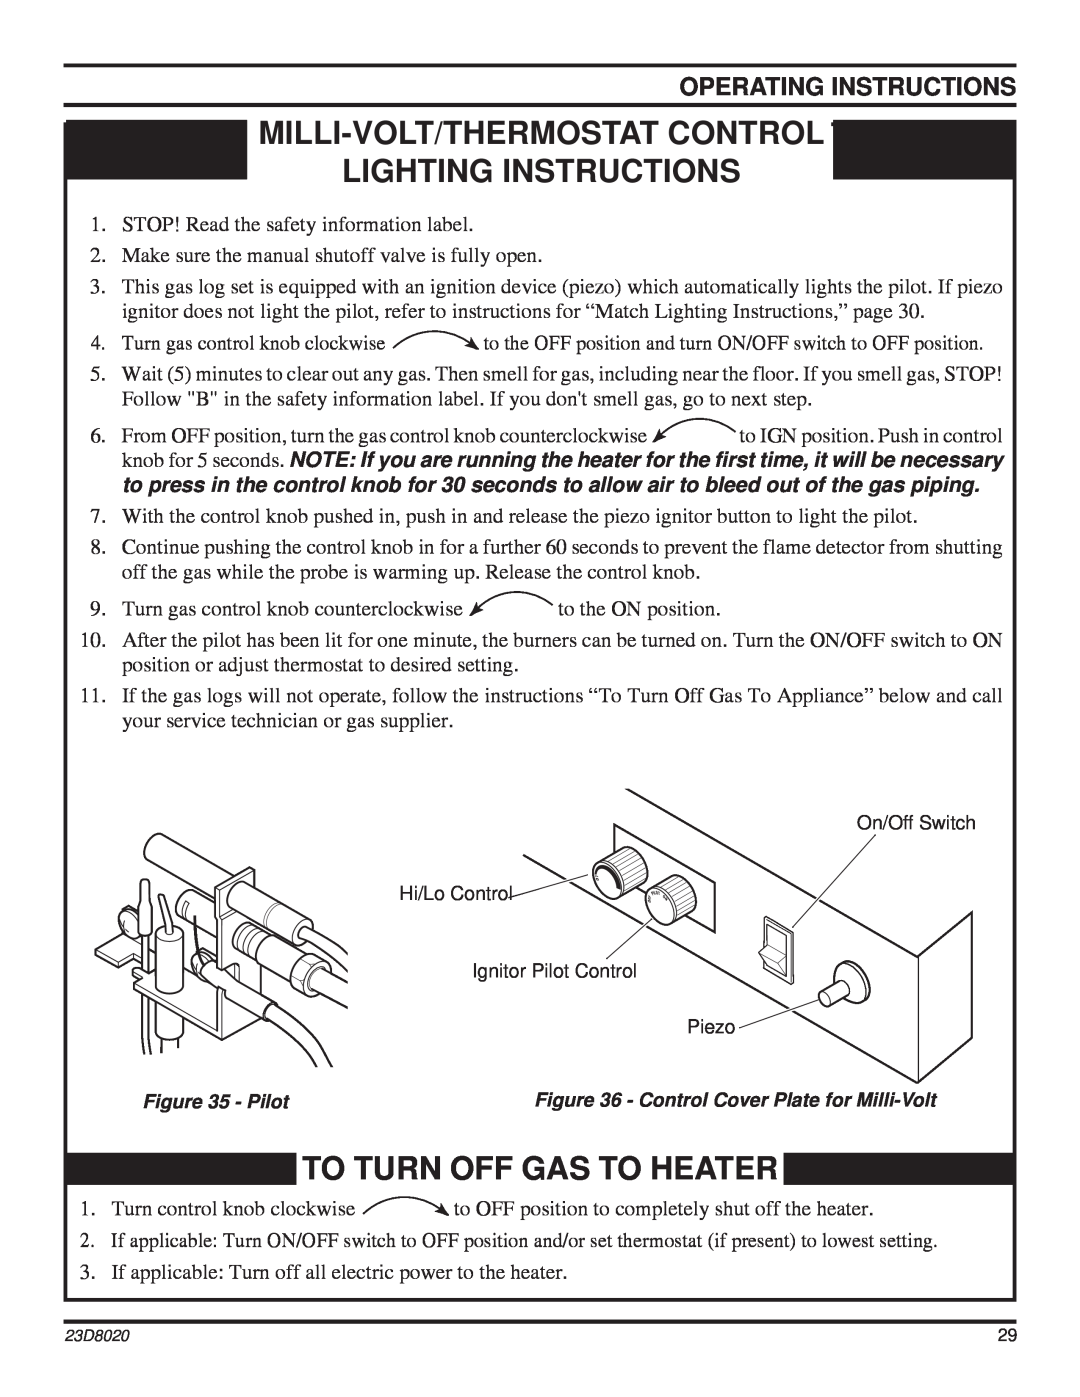 Monessen Hearth DIS33G manual Milli-Volt/Thermostatcontrol, Lighting Instructions, To Turn Off Gas To Heater 